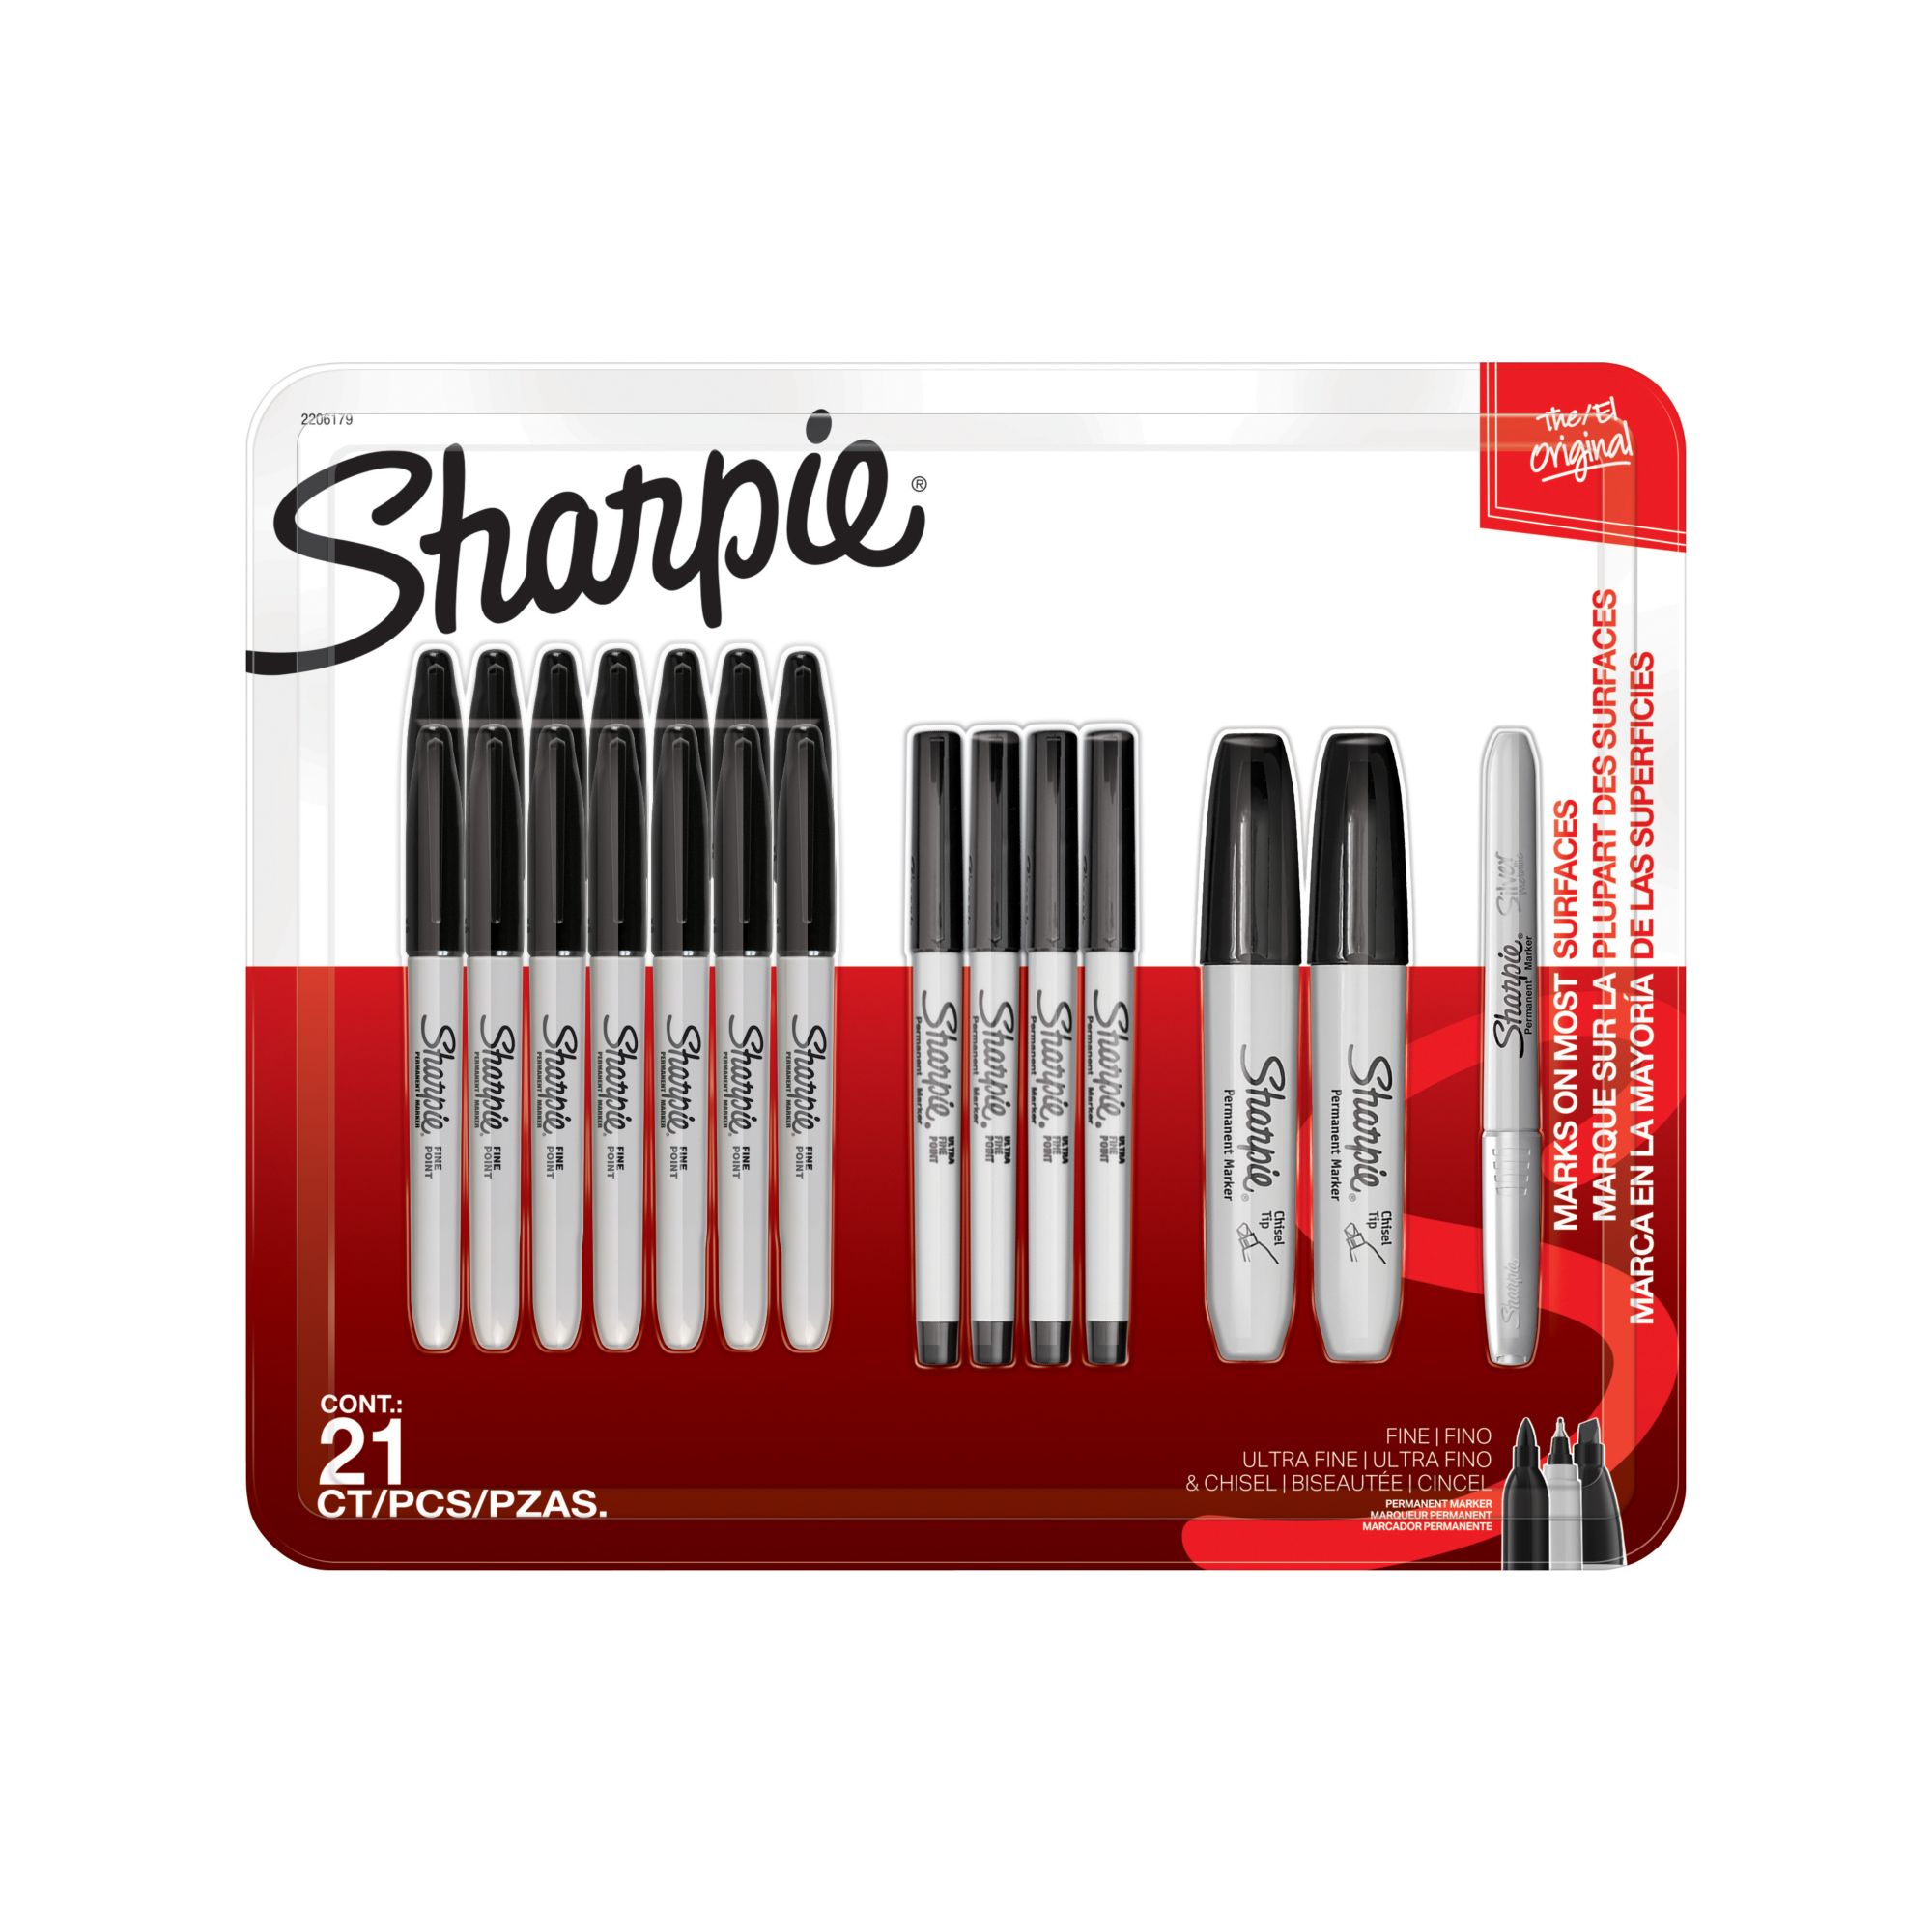 Sharpie Assorted Tip Permanent Markers, 21 ct.